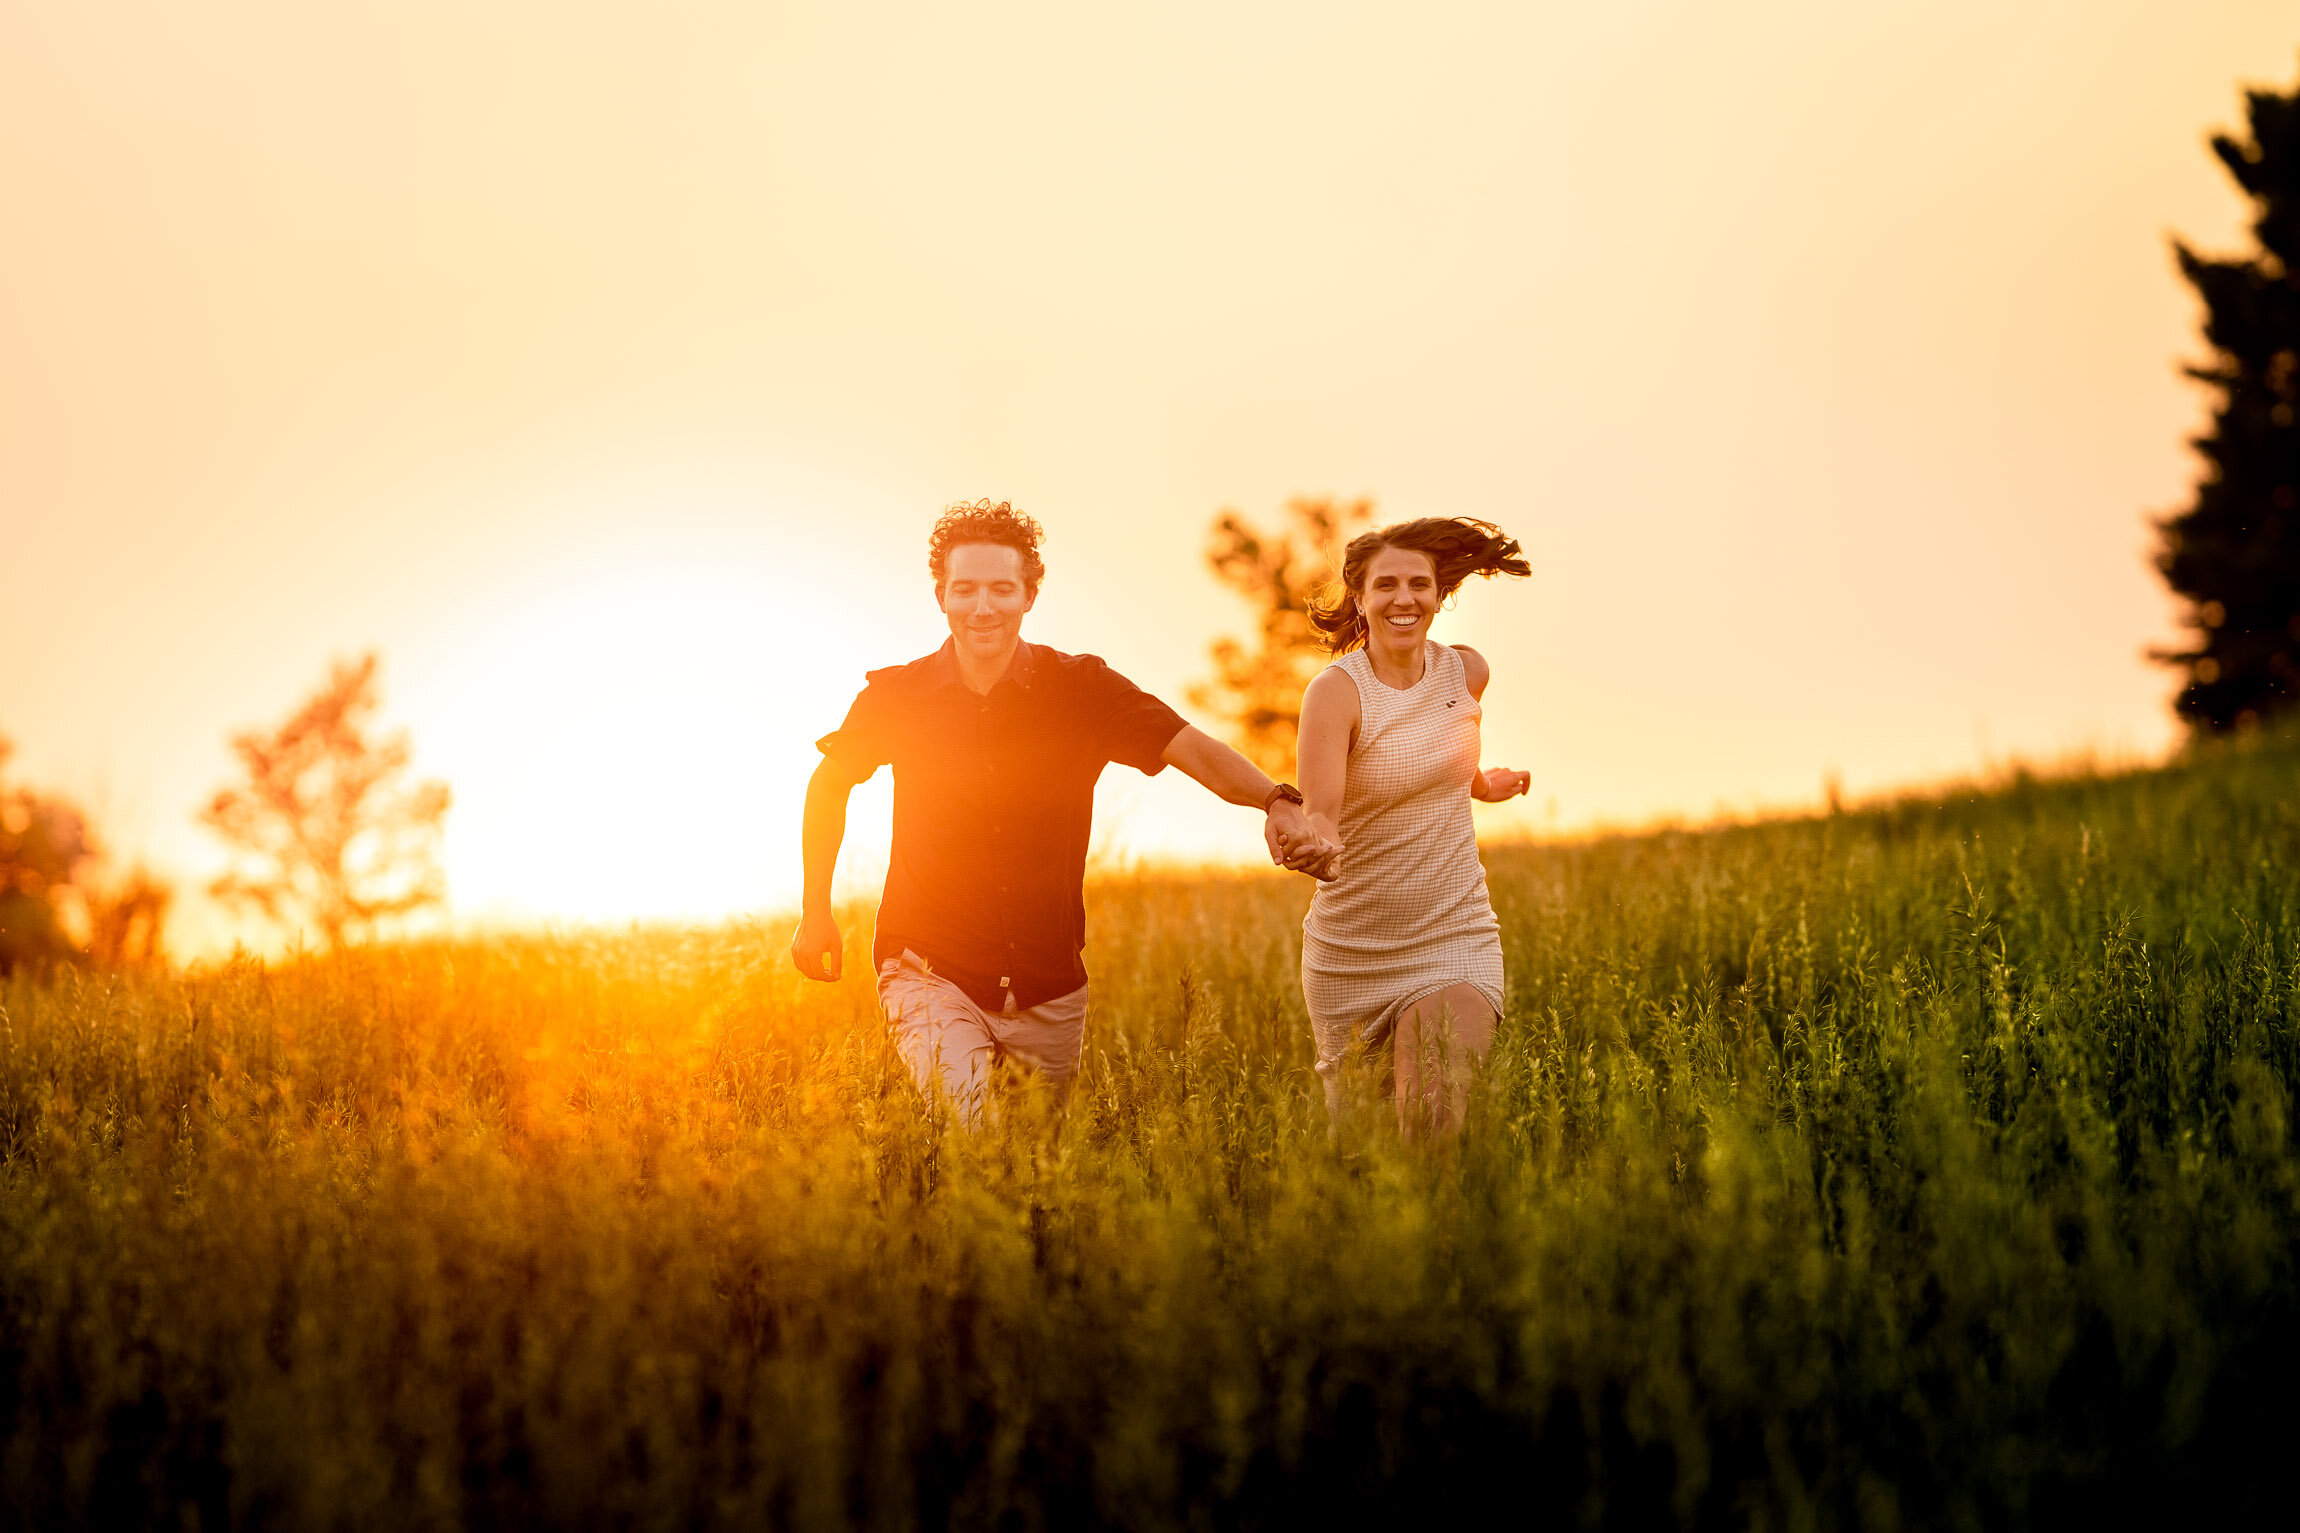 Engaged couple holds hands and runs through an open field of tall grass during golden hour, Engagement Session, Engagement Photos, Engagement Photos Inspiration, Engagement Photography, Engagement Photographer, Winter Engagement Photos, Mountain Engagement Photos, Denver engagement session, Denver engagement photos, Denver engagement photography, Denver engagement photographer, Denver engagement inspiration, Colorado engagement session, Colorado engagement photos, Colorado engagement photography, Colorado engagement photographer, Colorado engagement inspiration